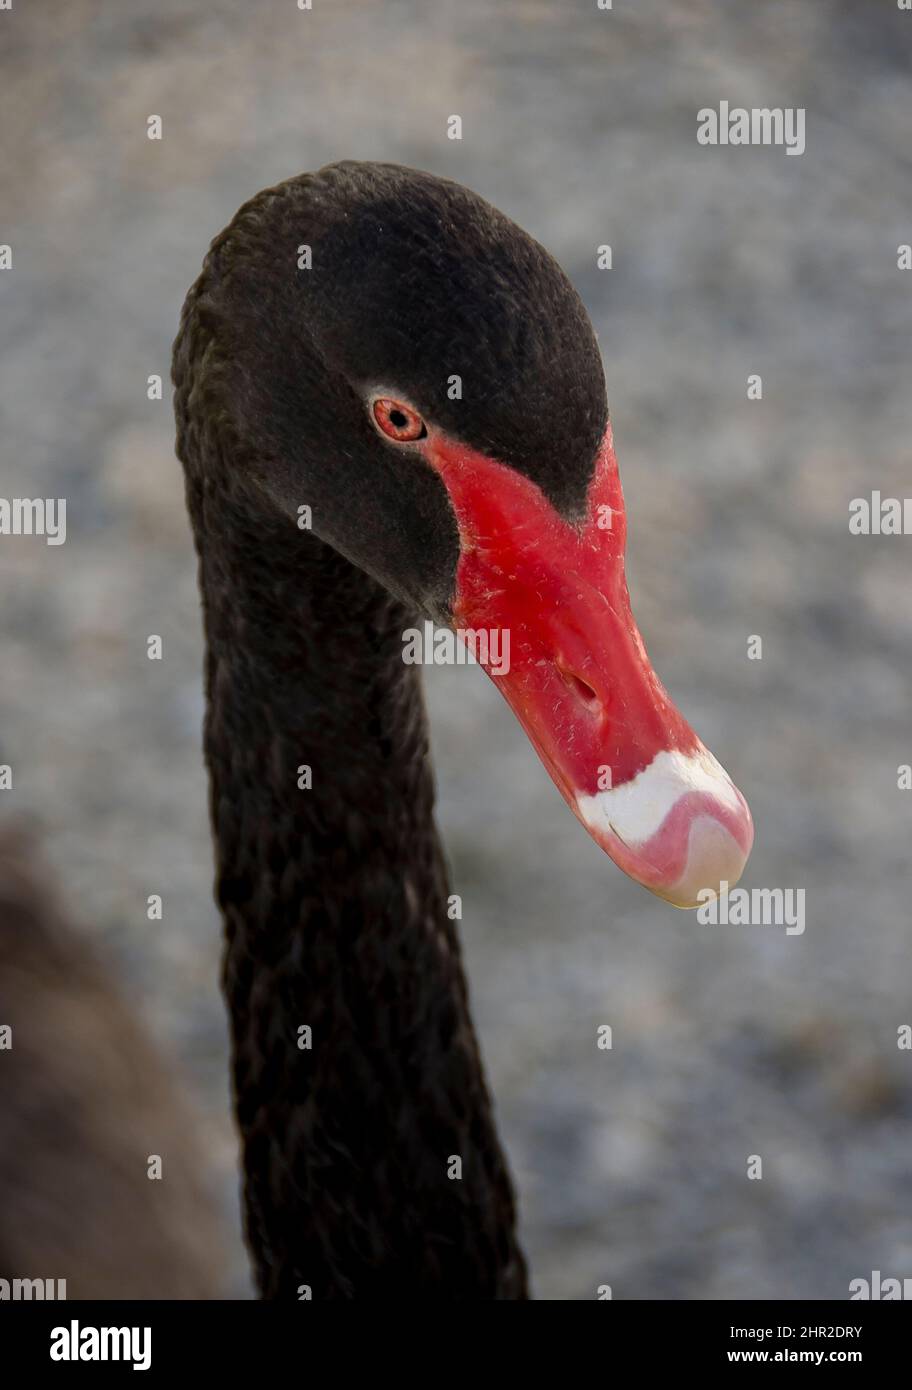 Head and neck portrait of a wild Australian black swan, Cygnus atratus, swimming in lake in Queensland, Australia. Red and white bill, brown eyes. Stock Photo